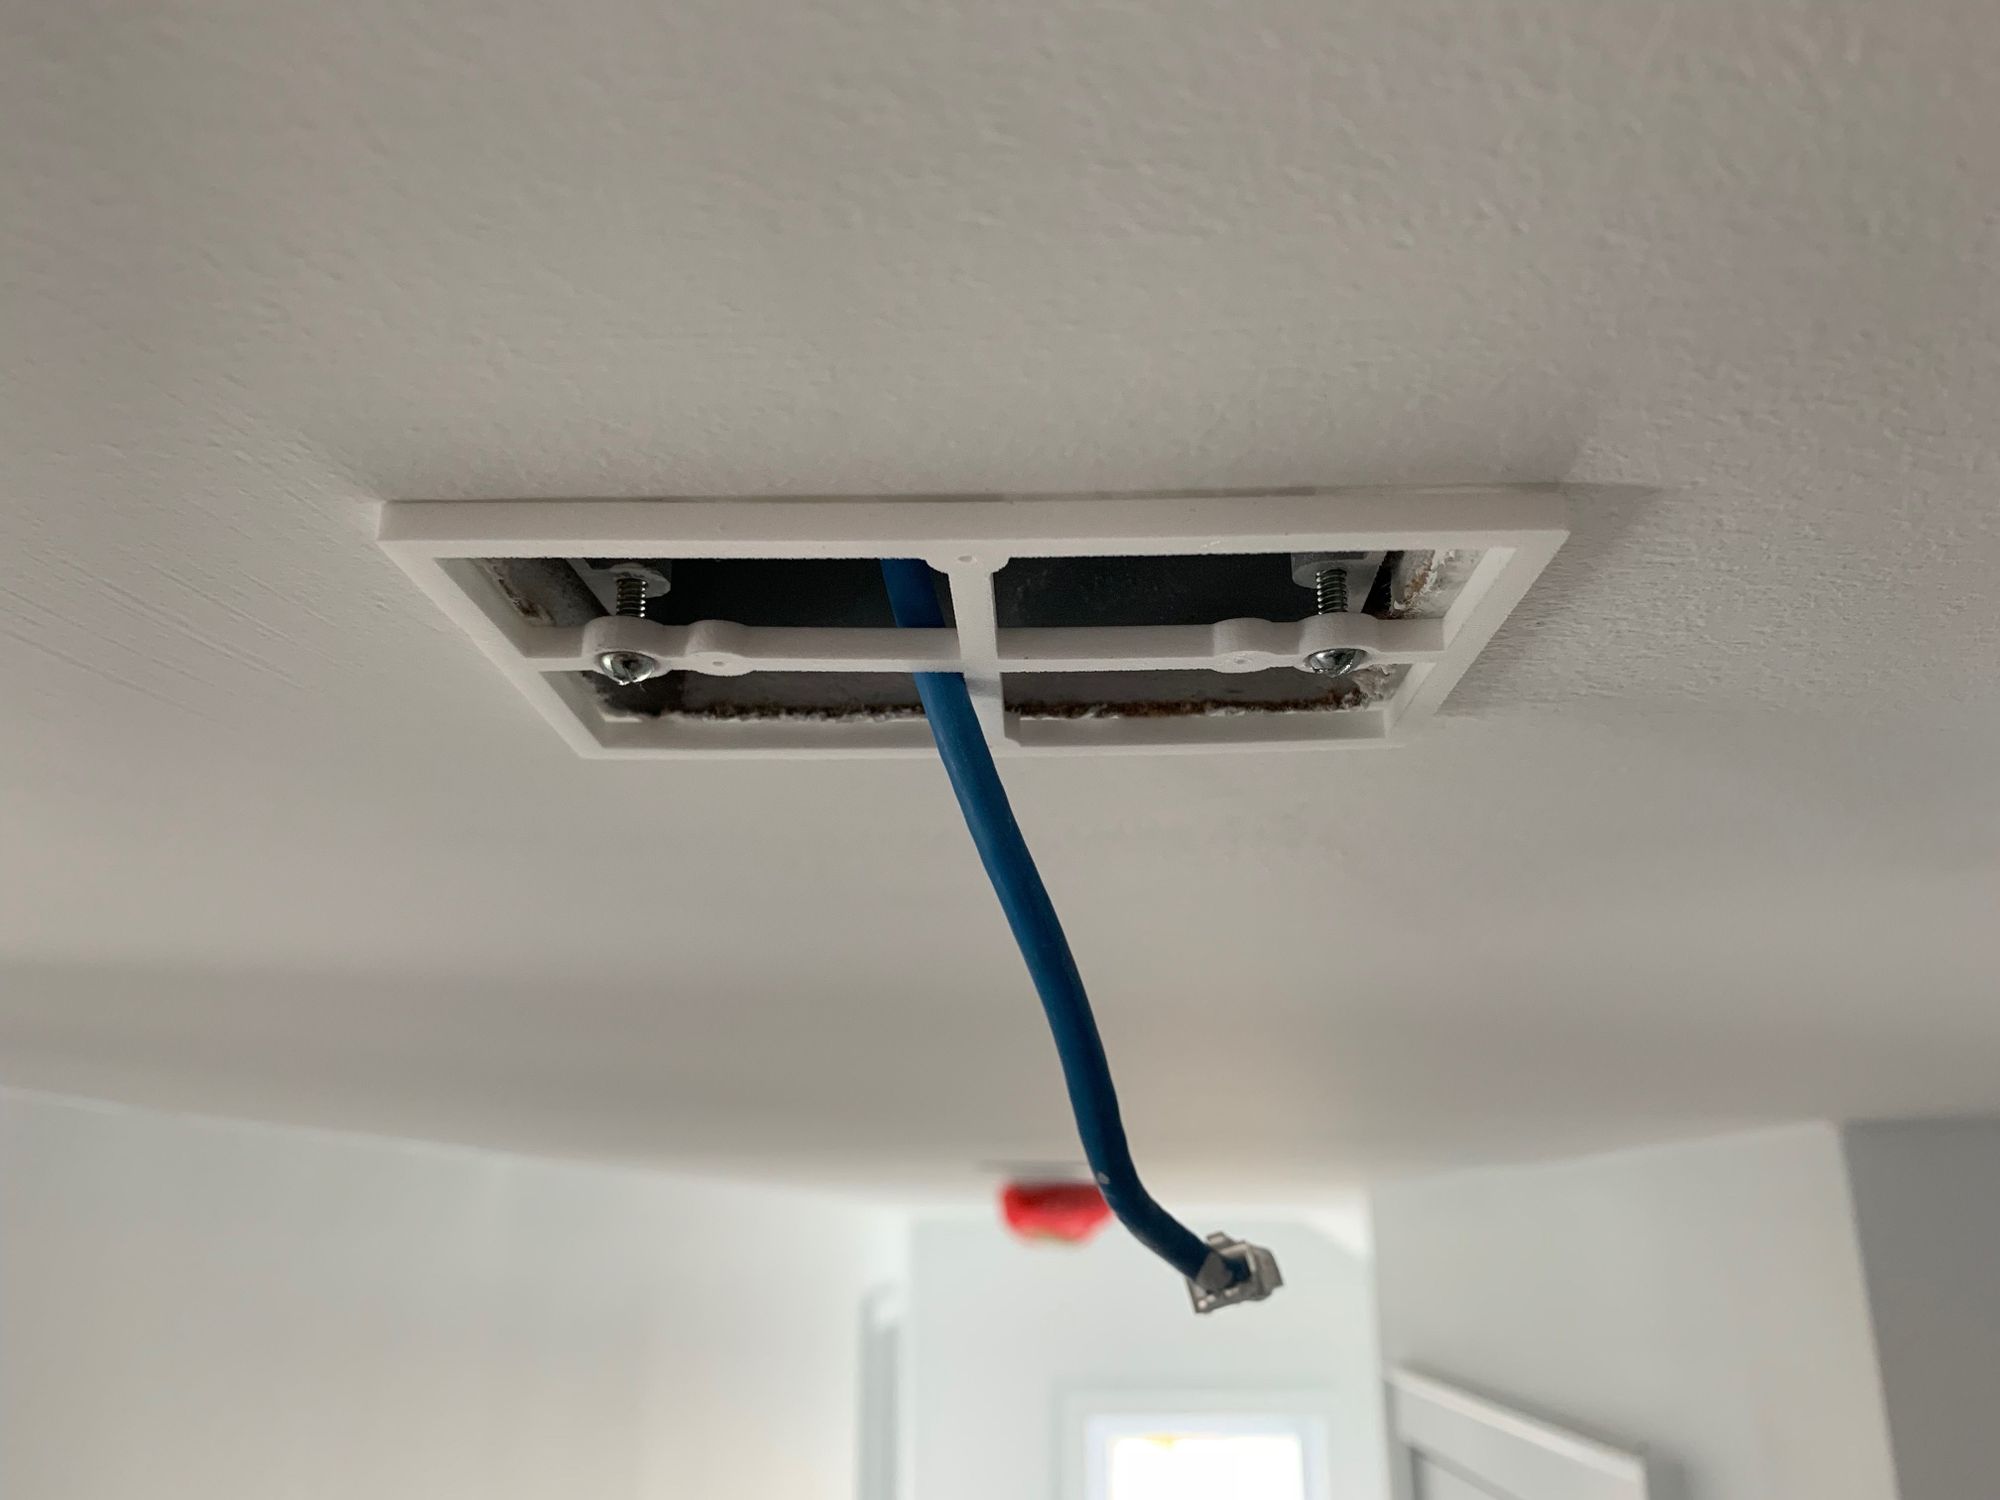 How Did You Attach Uap Ac Lites To Outlet Boxes Ubiquiti Community